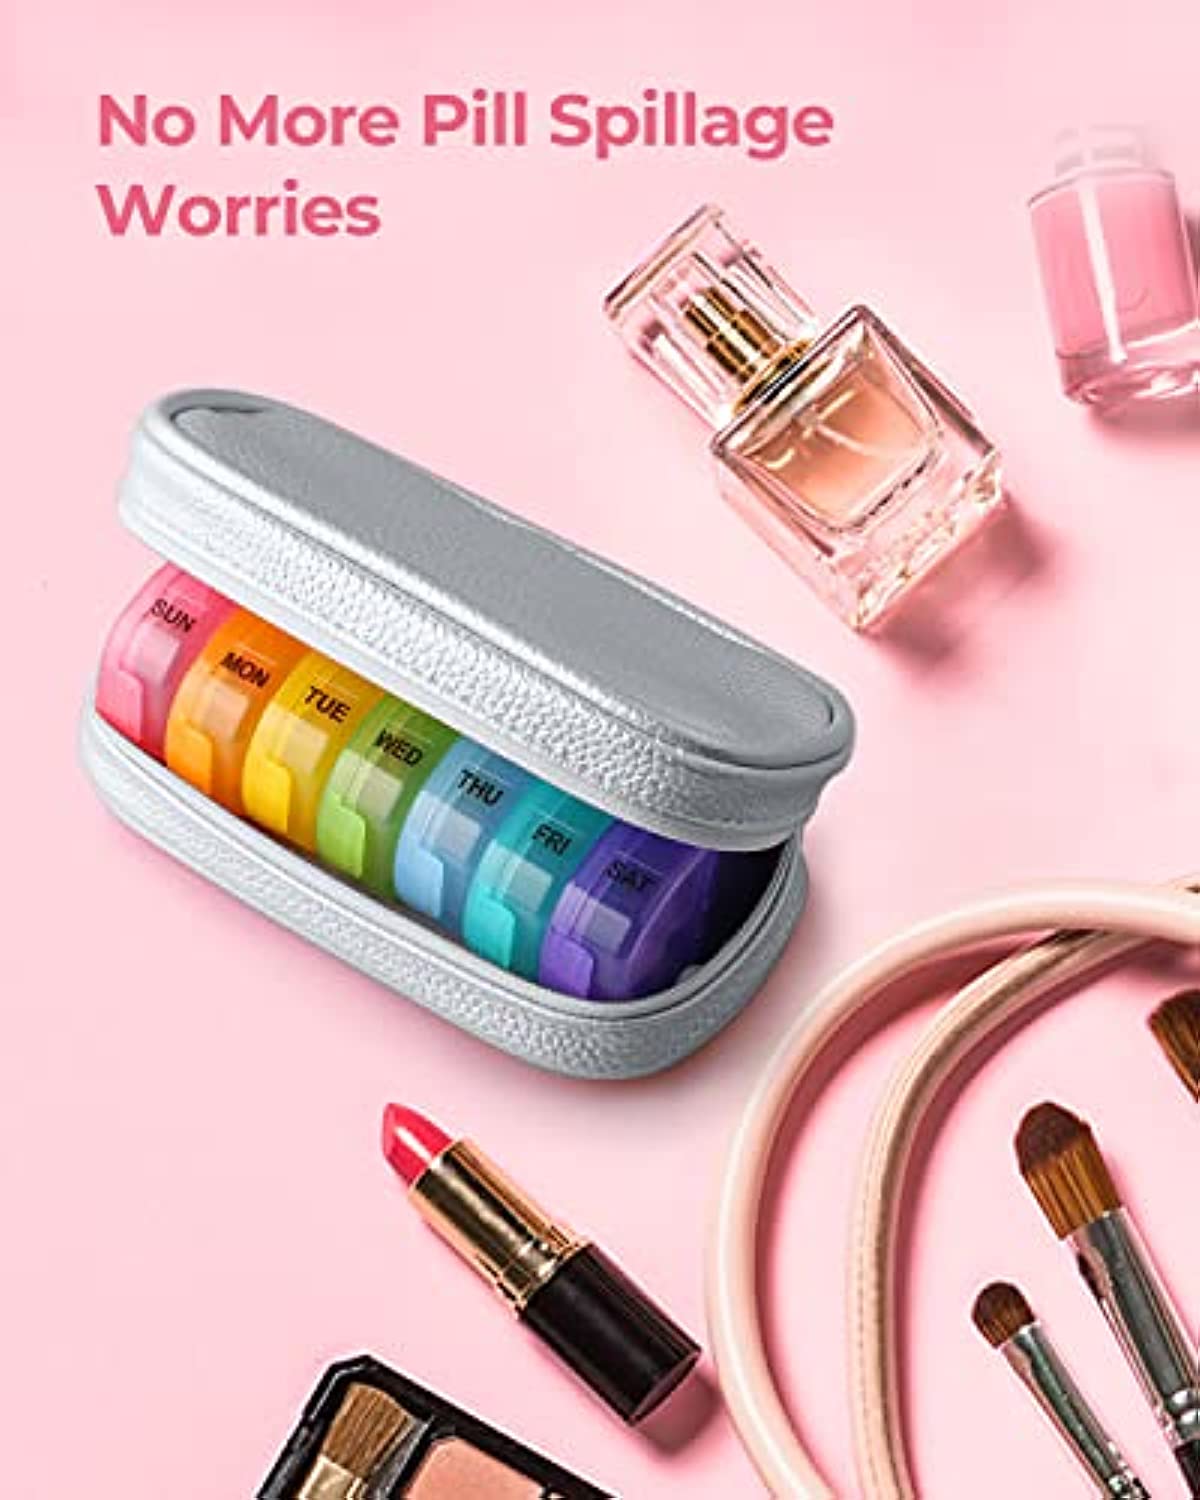 Cute Pill Organizer 2 Times a Day, AMOOS PU Leather Pill Case for Women, Portable Weekly Pill Box for Purse with Storage Bag to Hold Vitamins/Medications/Fish Oils/Supplements, Silver